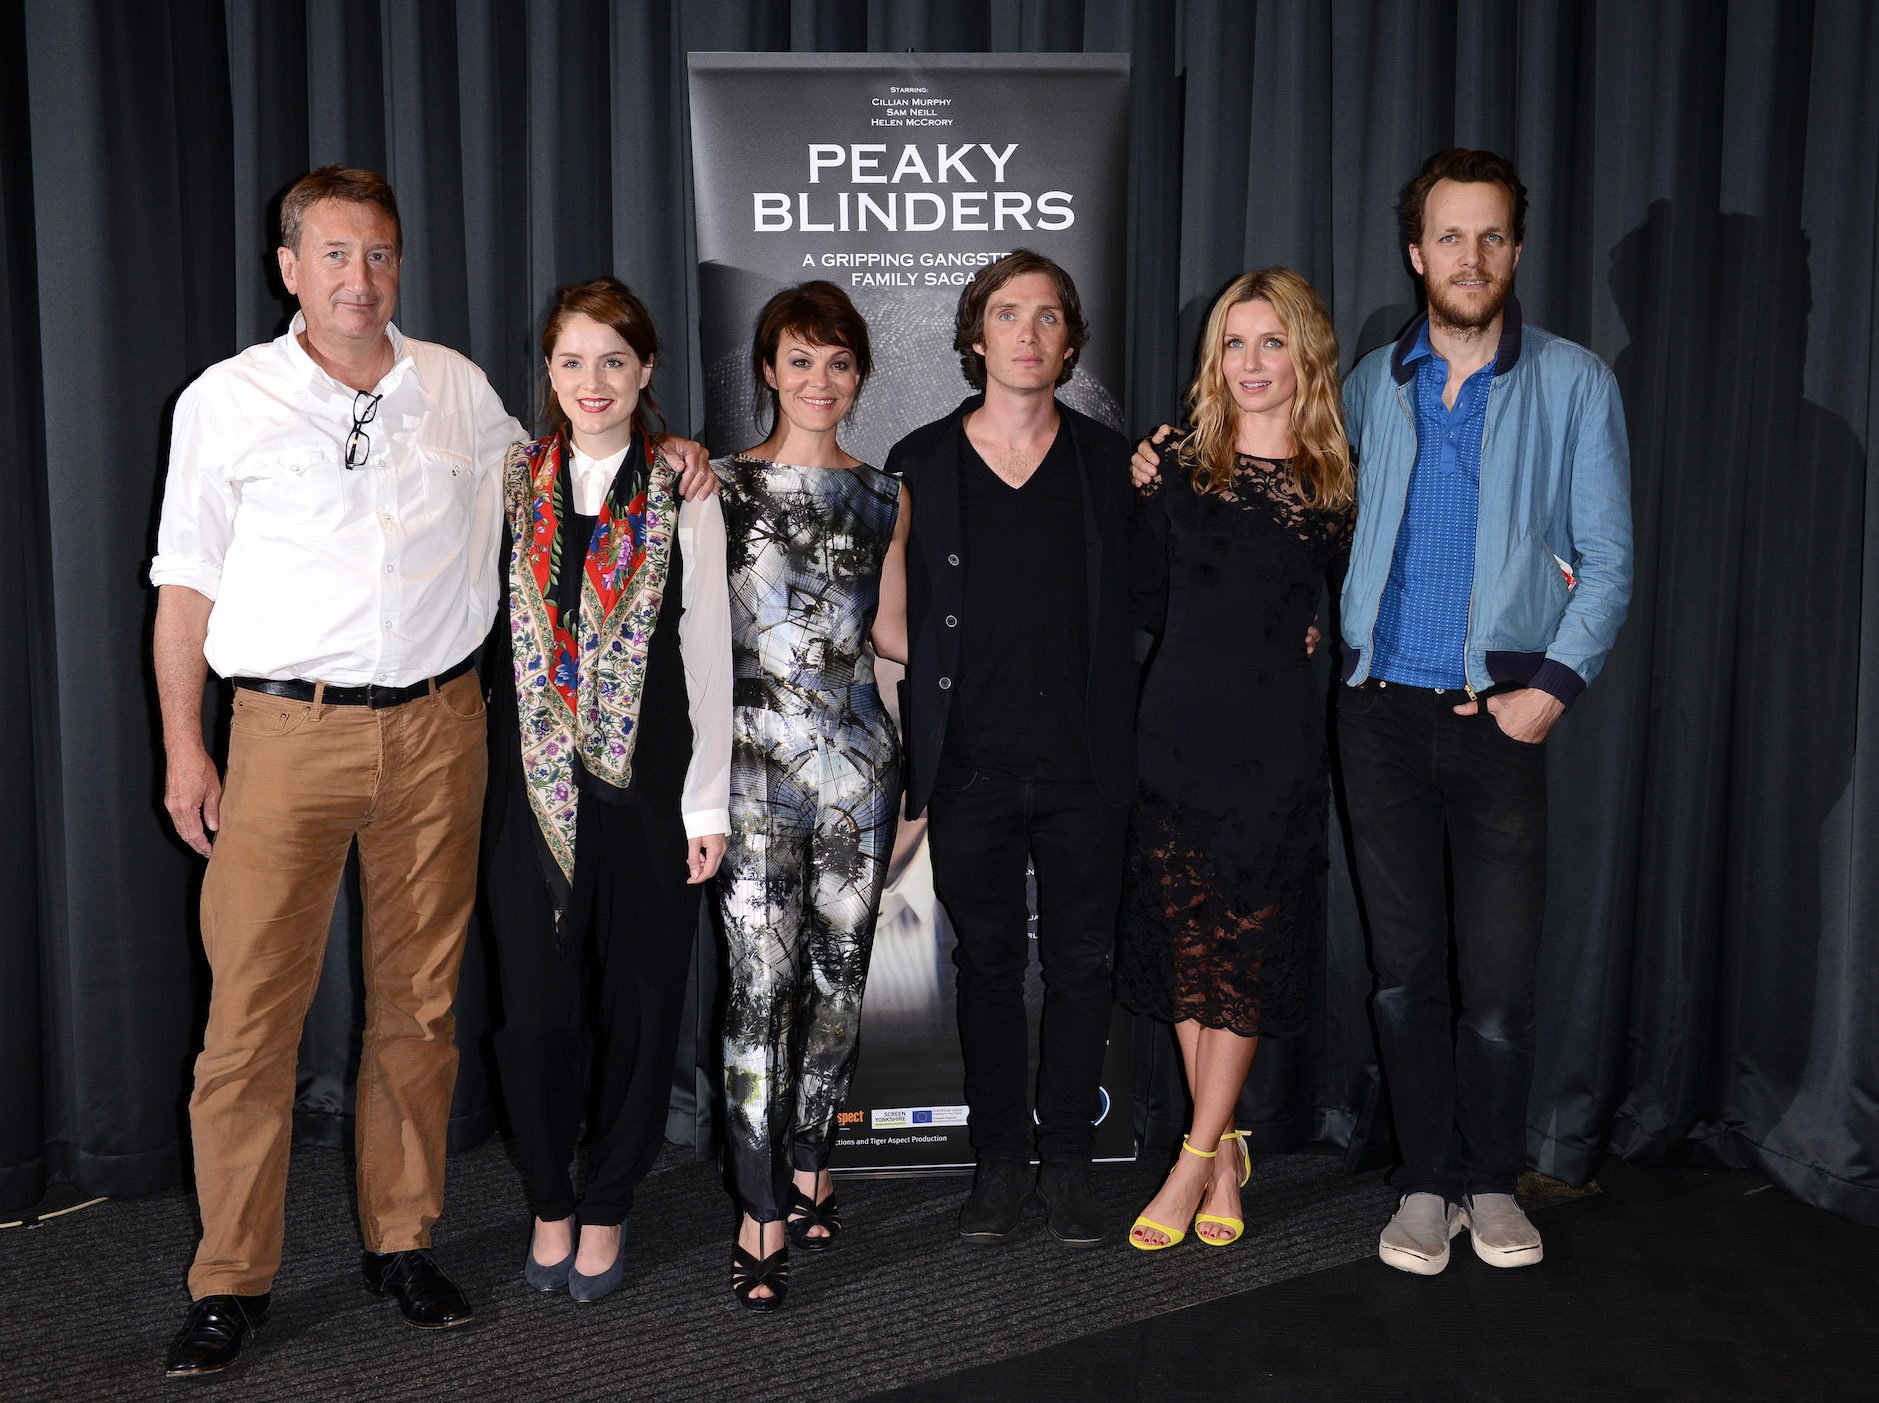 'Peaky Blinders' Season 6 writer/producer Steven Knight, Sophie Rundle, Helen McCrory, Cillian Murphy, Annabelle Wallis, and director Otto Bathurst standing together in front of a poster for the show